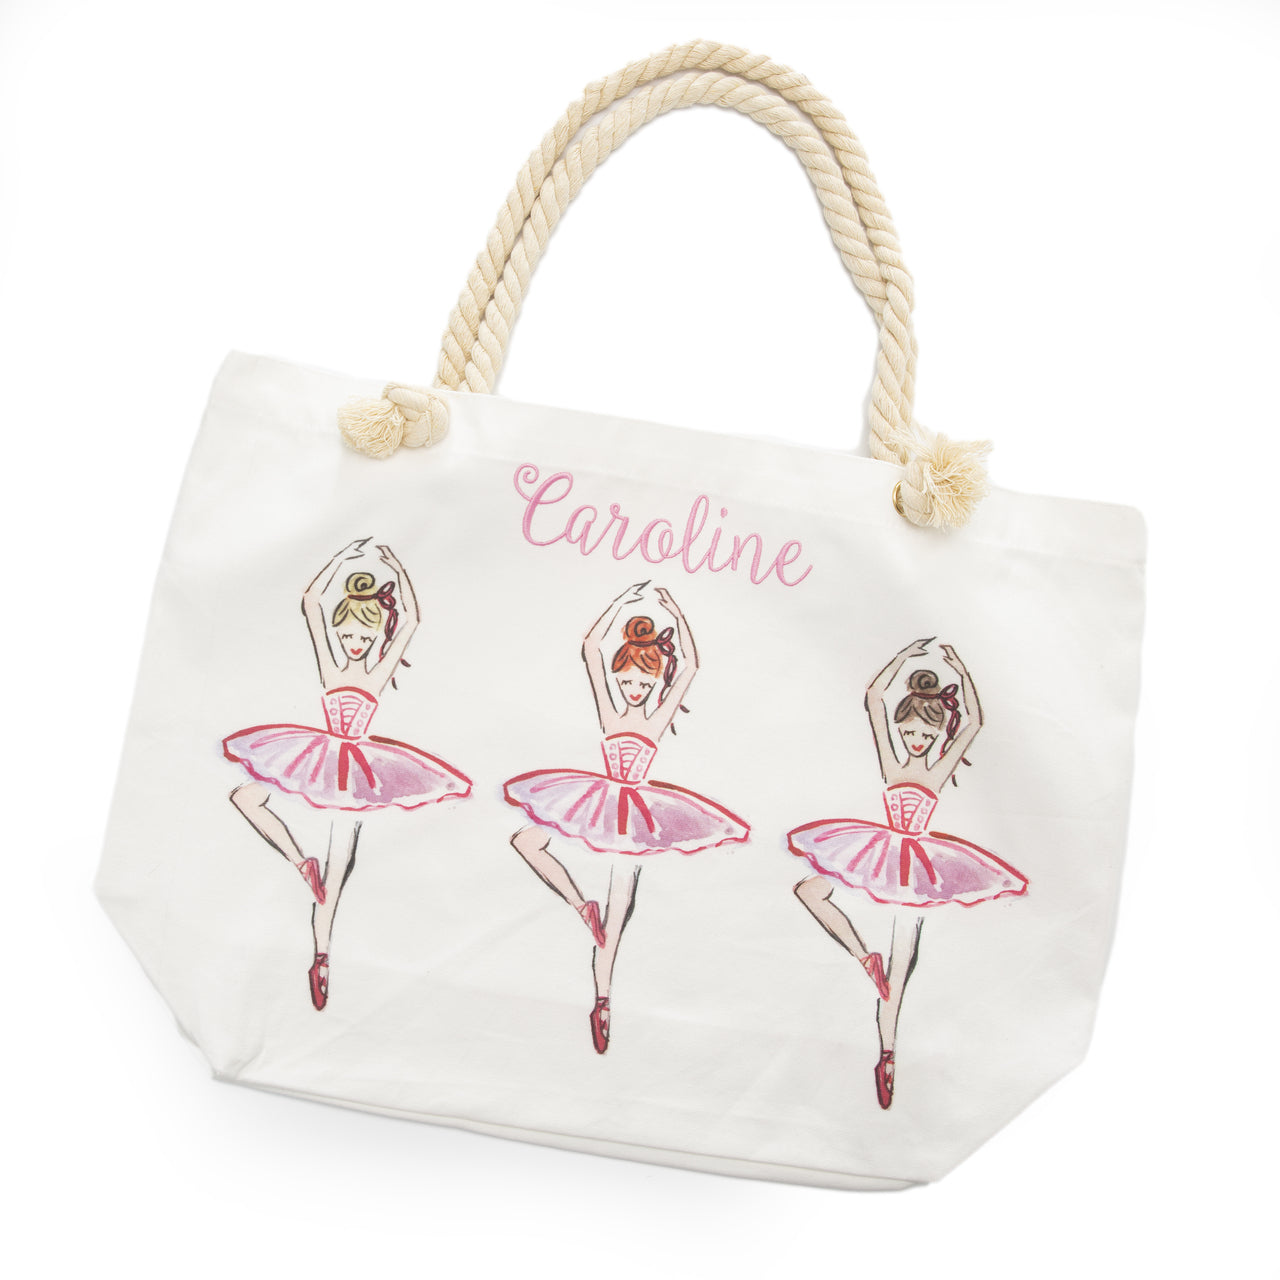 Congratulations on First Dance Recital Ballet Shoes Tote Bag for